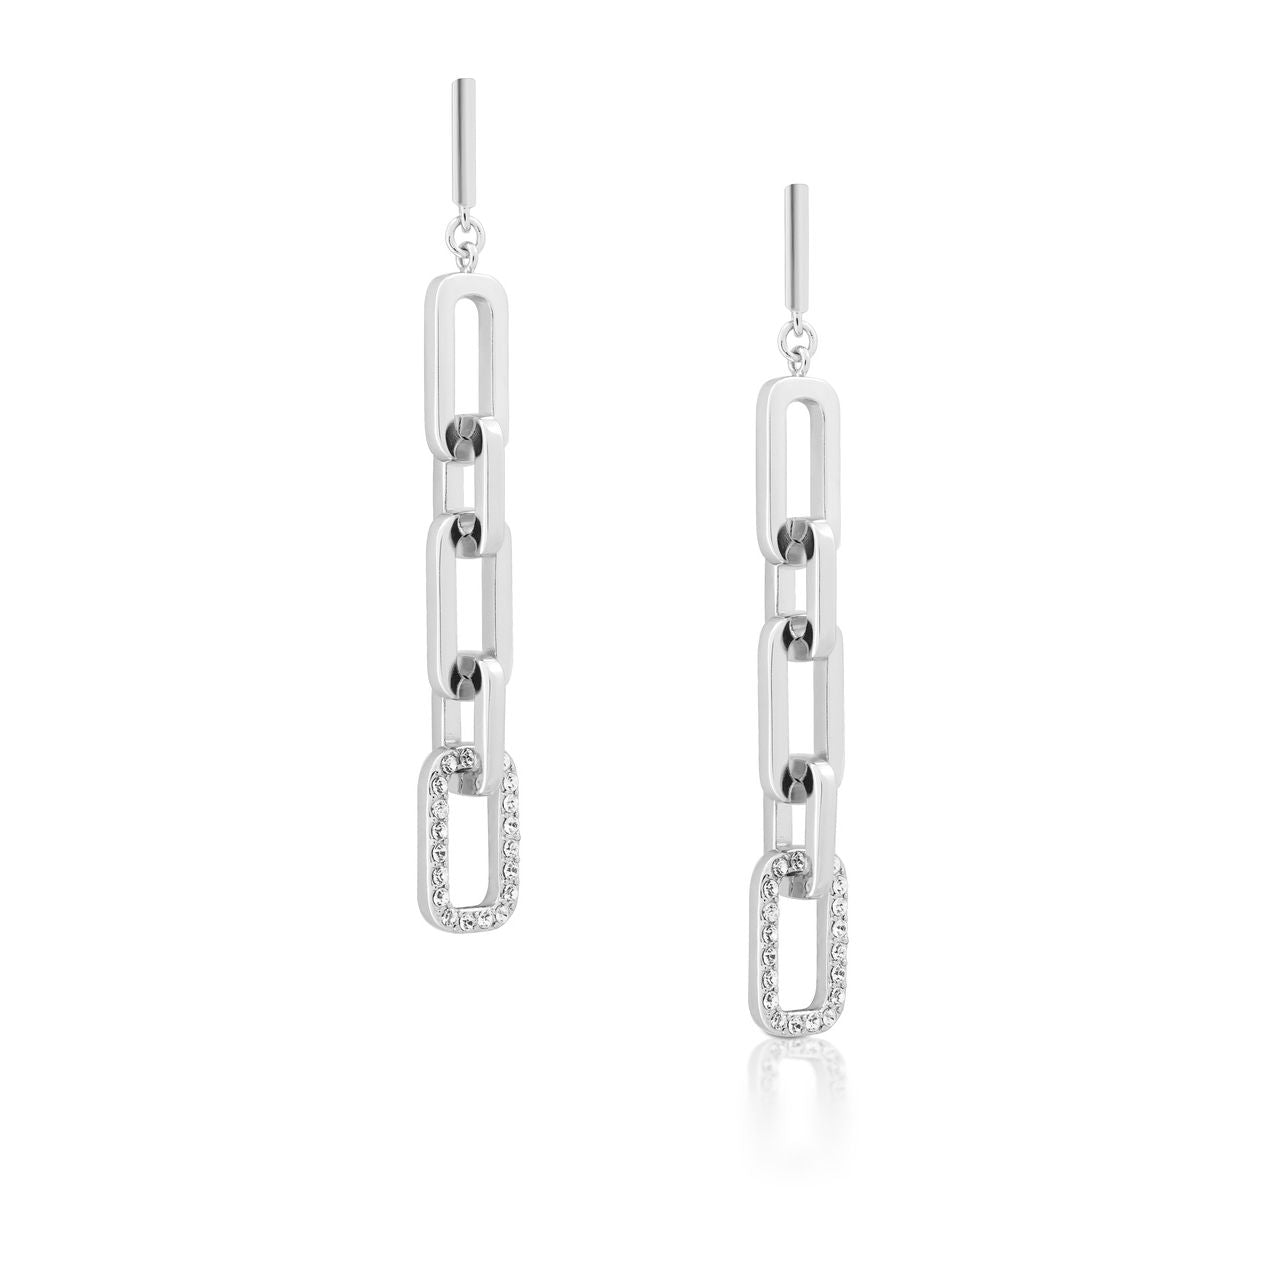 Romi Dublin Silver Chain Earrings  This easy-to-wear jewellery collection was inspired by daughter Romi who loves to style and accessorise. An outfit isn’t complete until the perfect pieces of jewellery and accessories have been selected to enhance it.